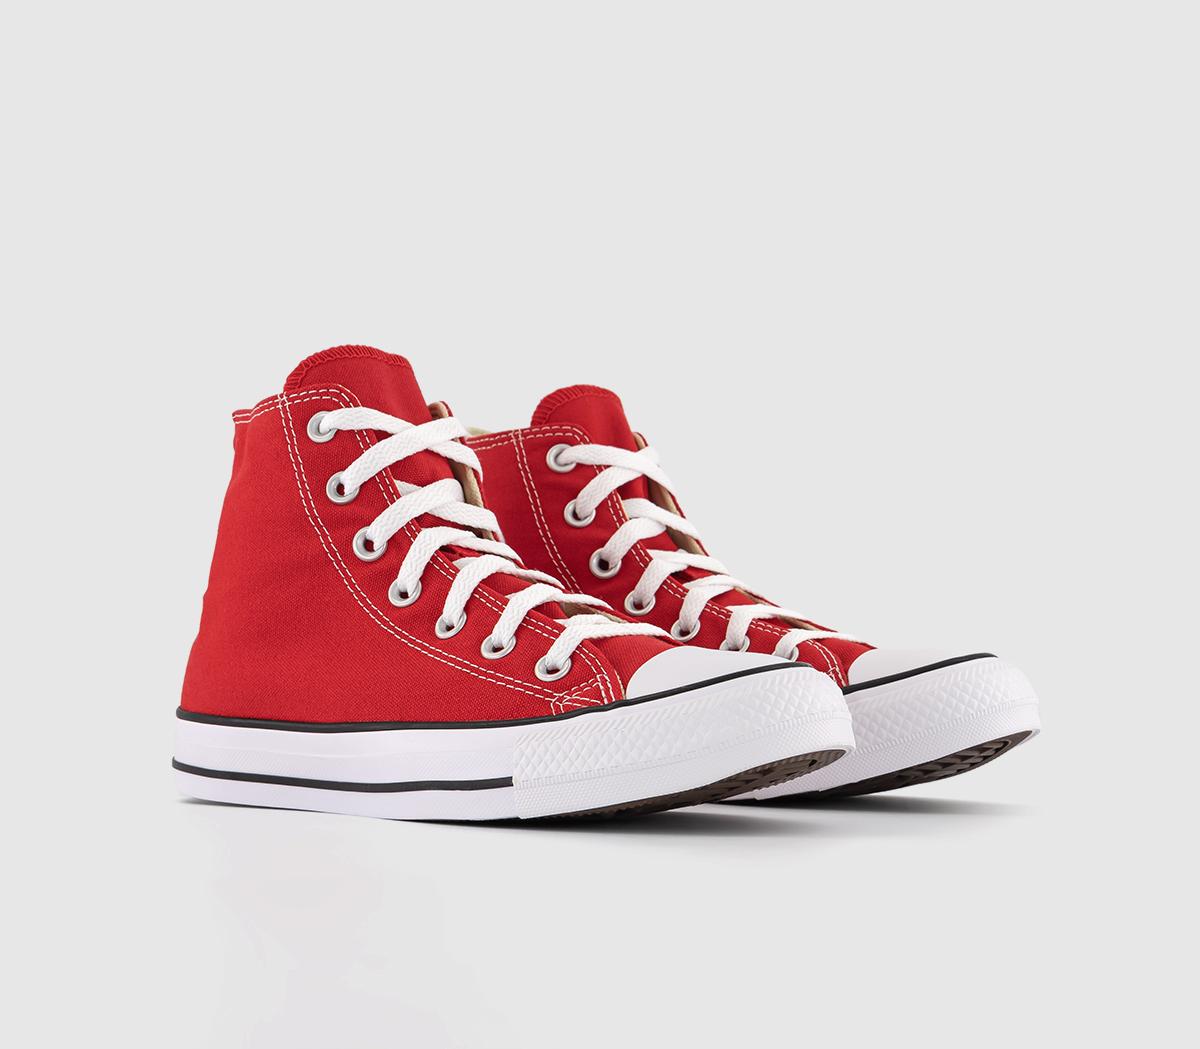 Converse All Star Hi Red Canvas - Unisex Sports